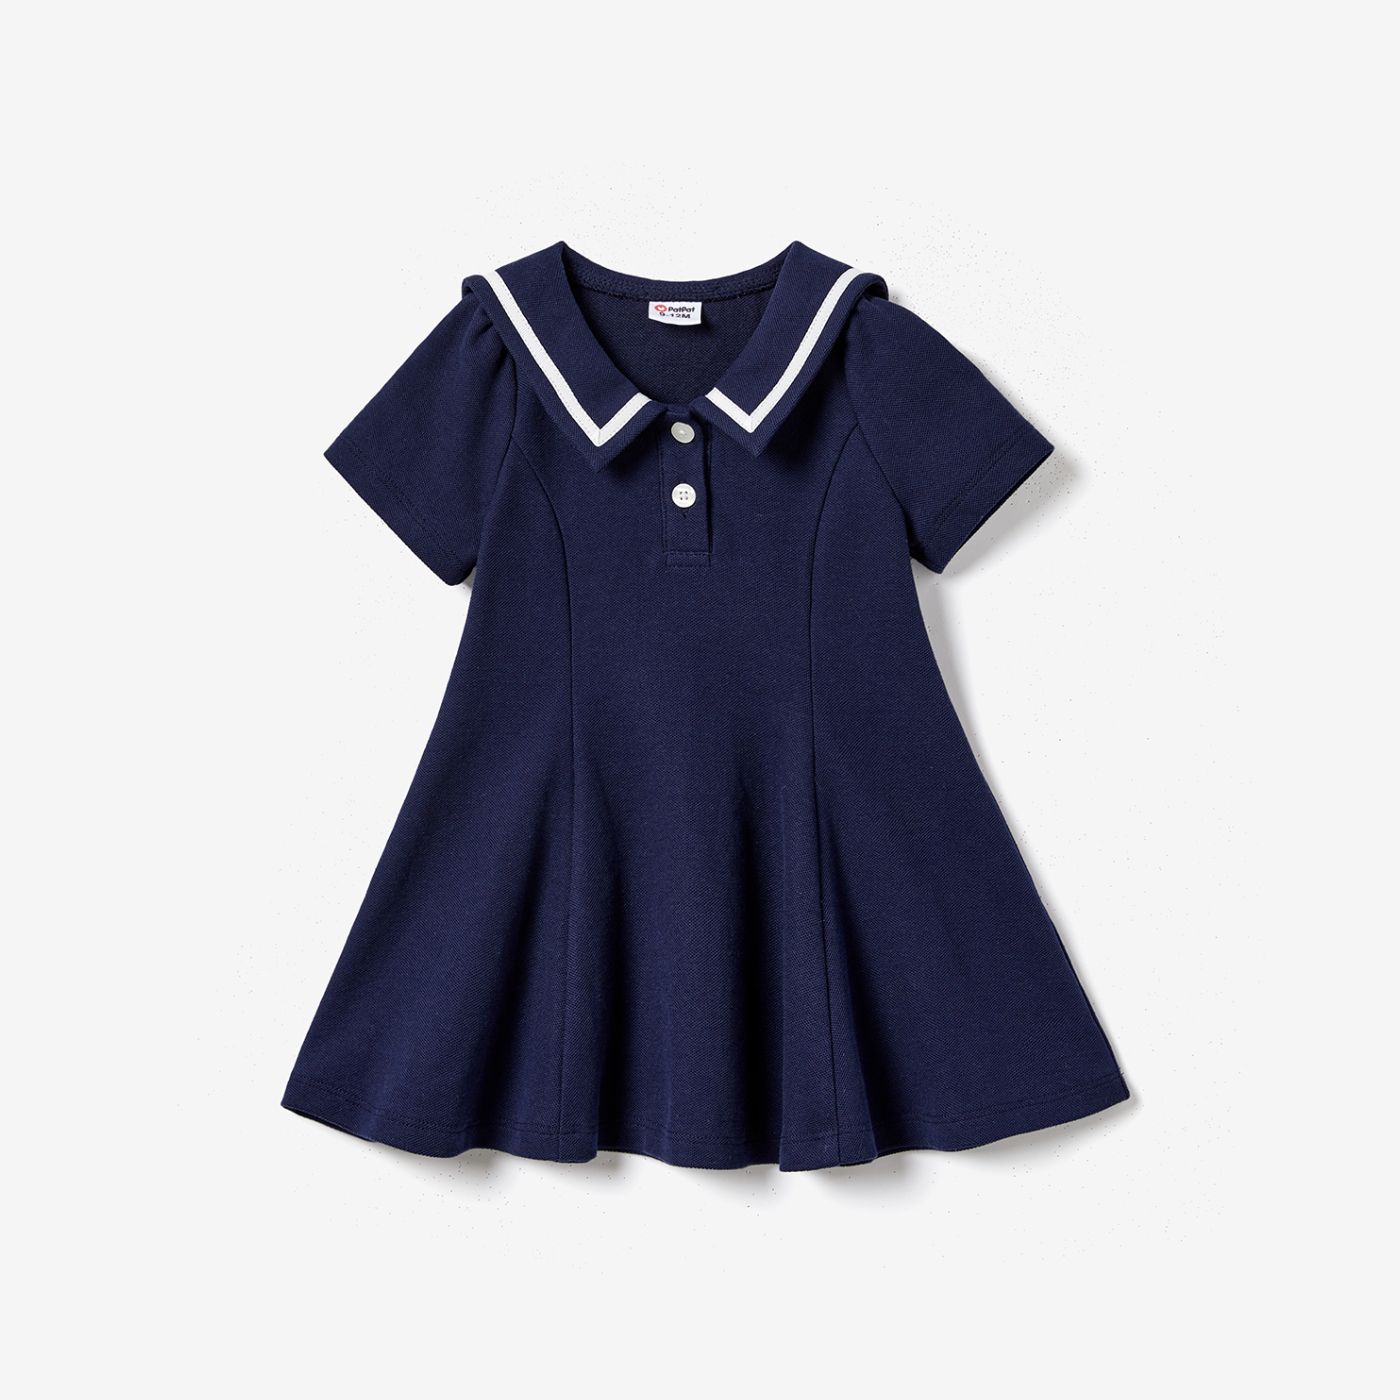 Family Matching Casual Navy Blue Short-sleeve Stripes Polo Shirts And Solid Sailor Collar Smocked Hem Dresses Sets